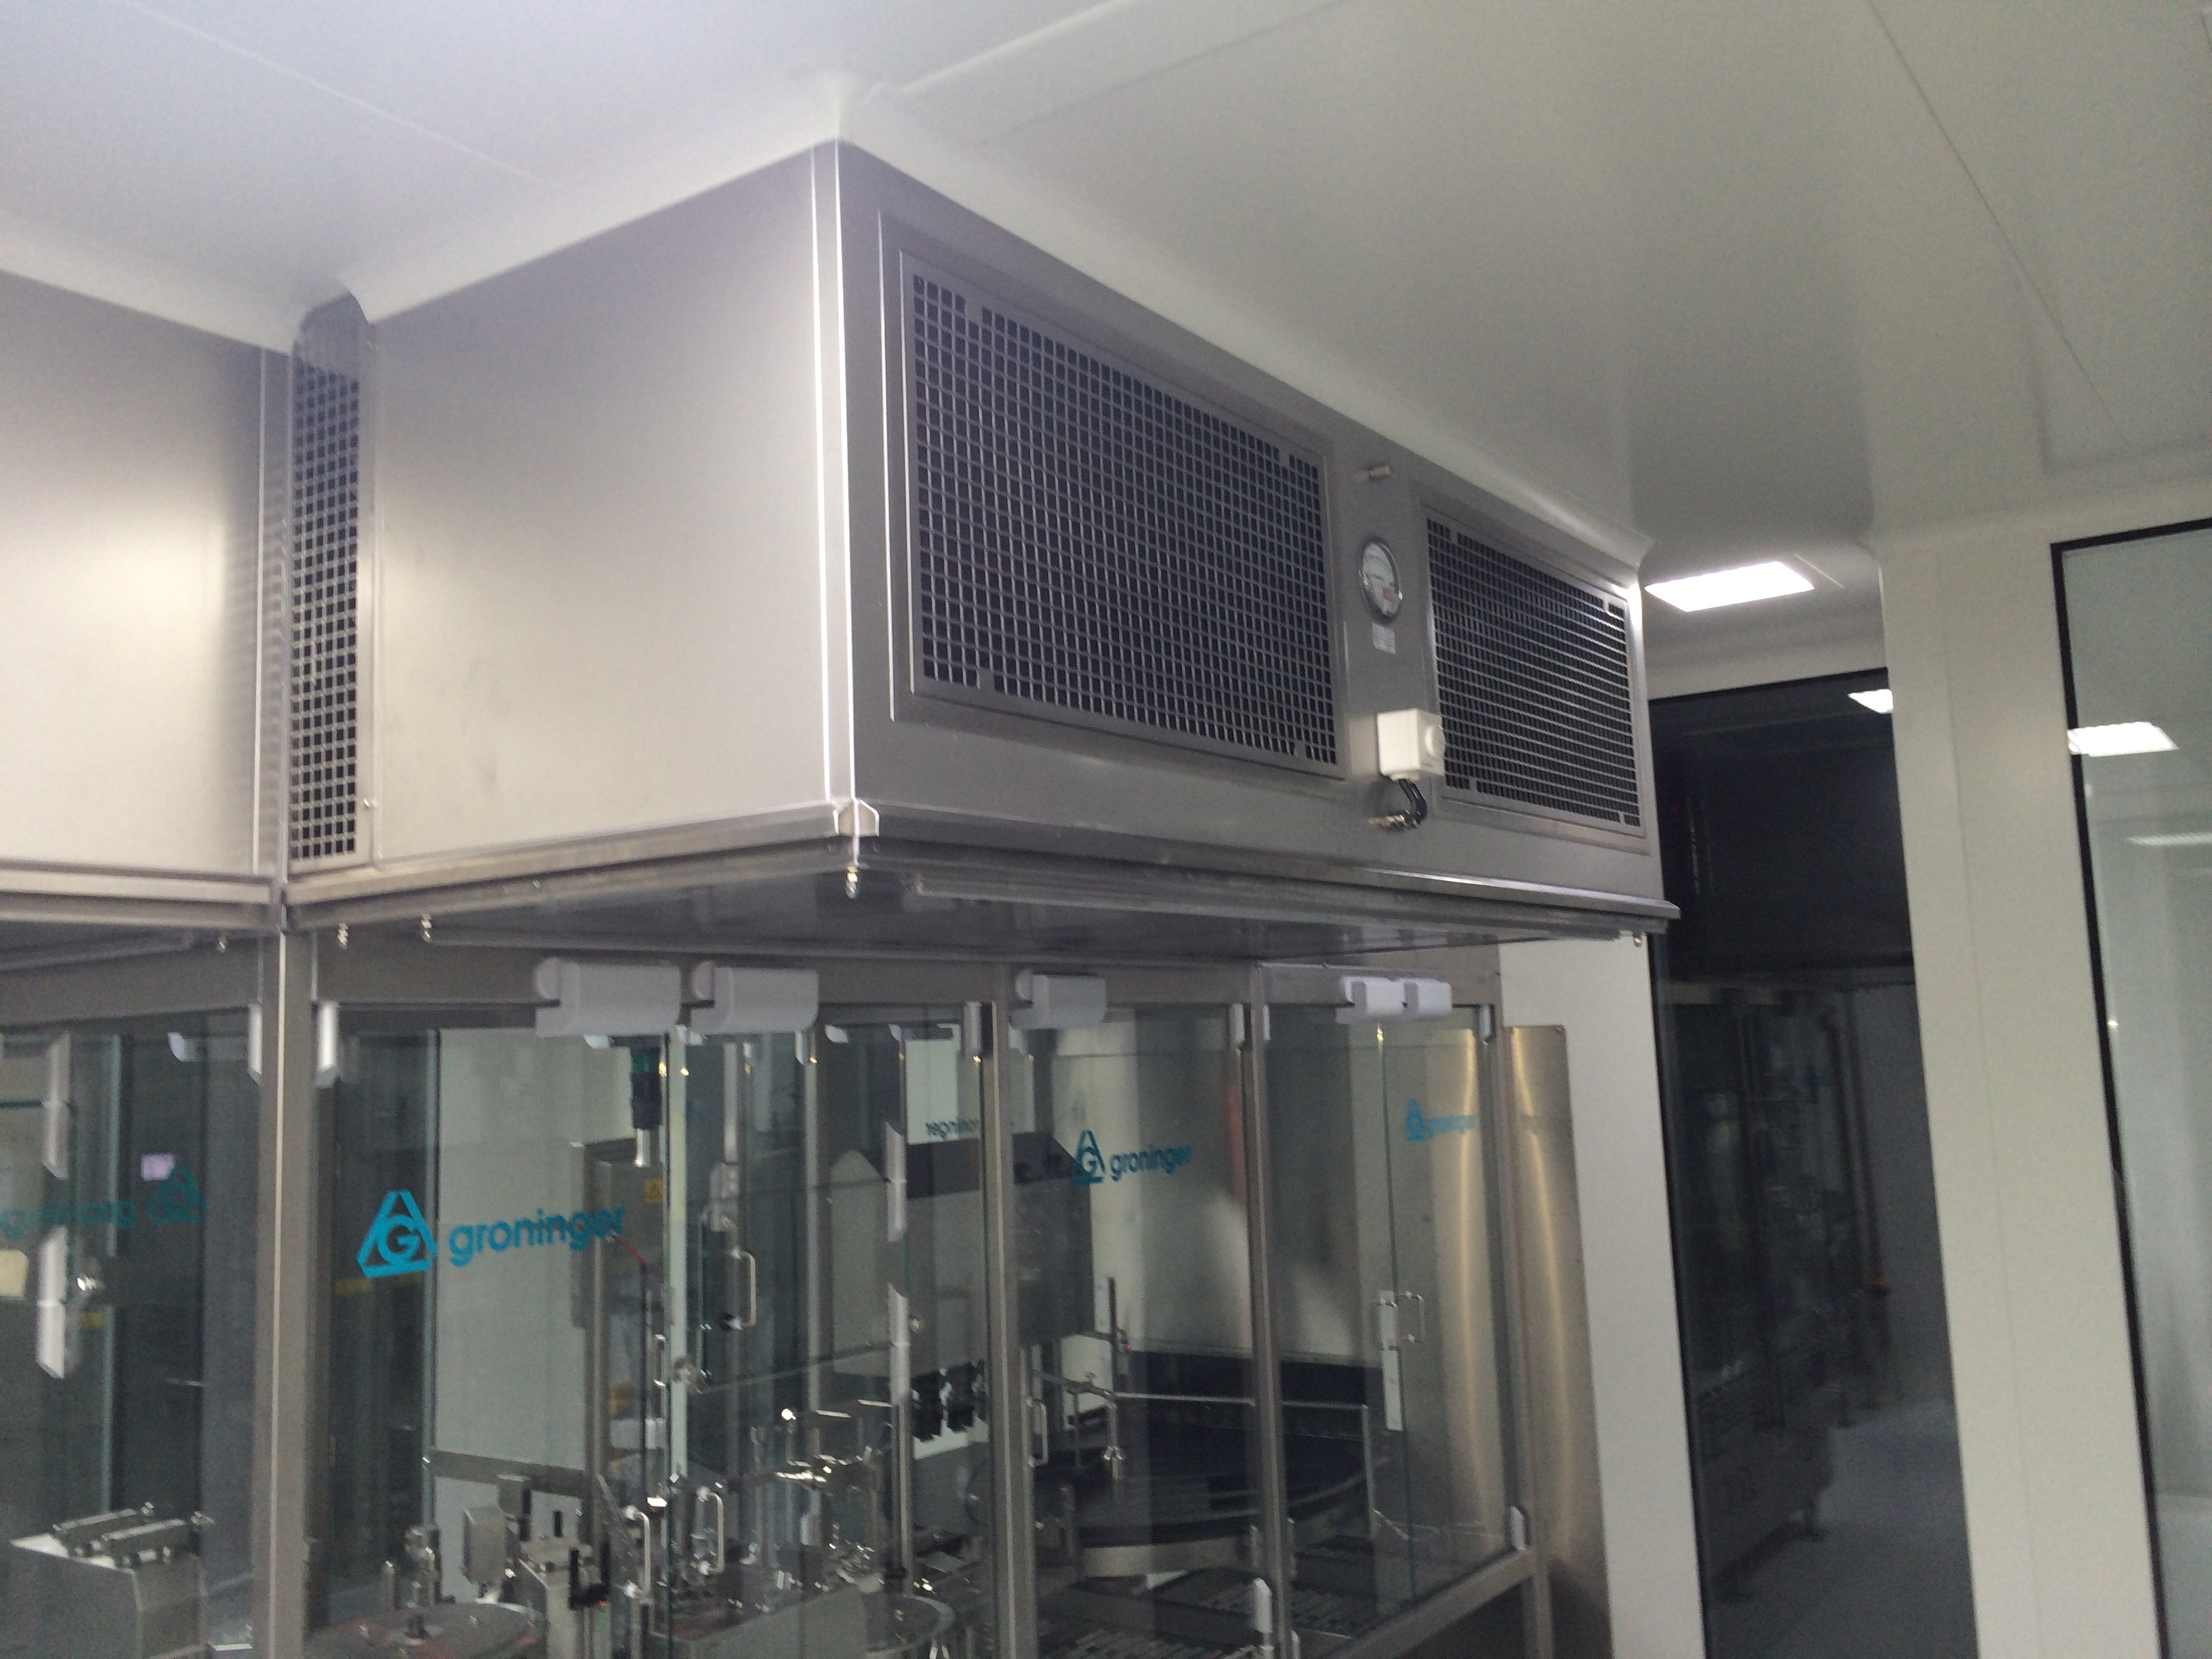 Laminar Flow Cabinets are designed to be used in all kinds of production and working areas that require clean environment and laminar flow.